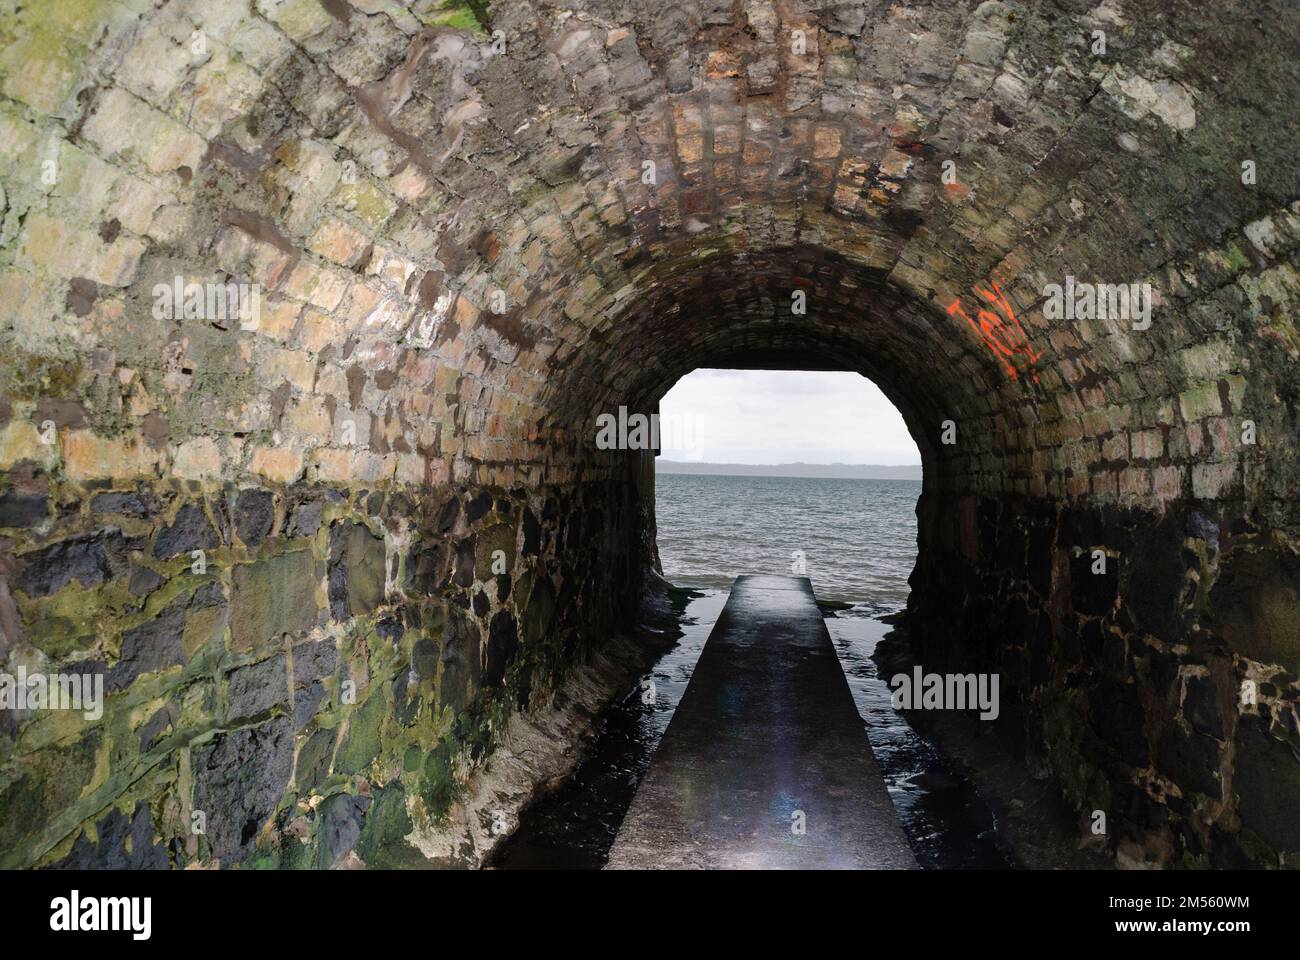 Dirty water runs down the sides of a path through a sewer tunnel to flow out to the sea. Stock Photo